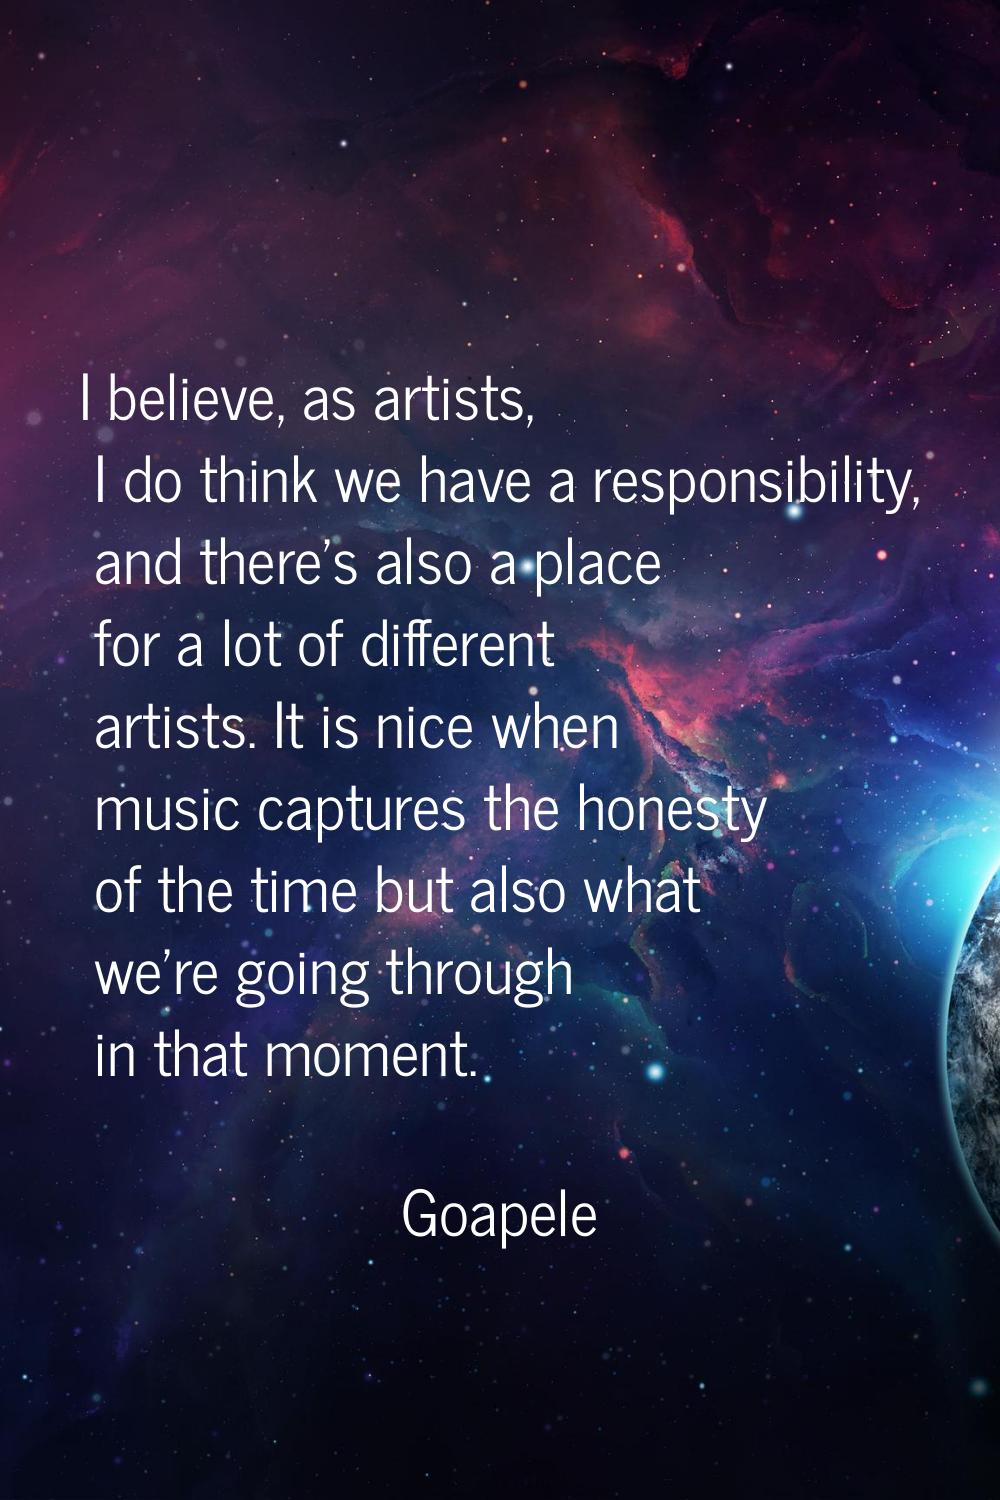 I believe, as artists, I do think we have a responsibility, and there's also a place for a lot of d